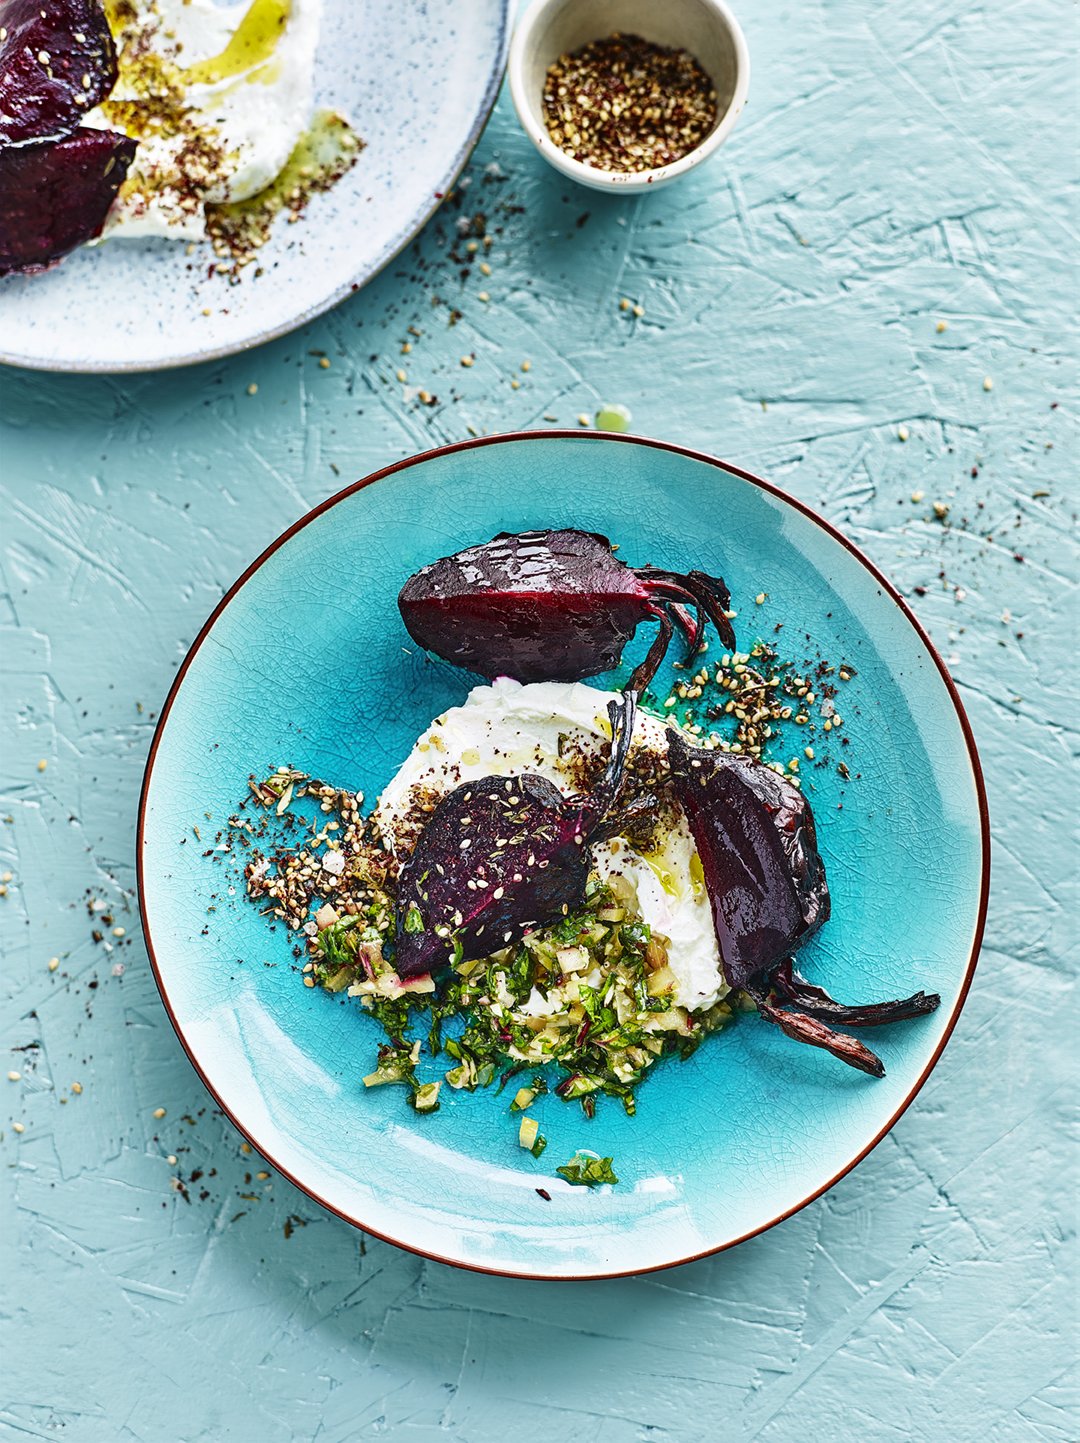 1641-Labneh and Beetroot.jpg